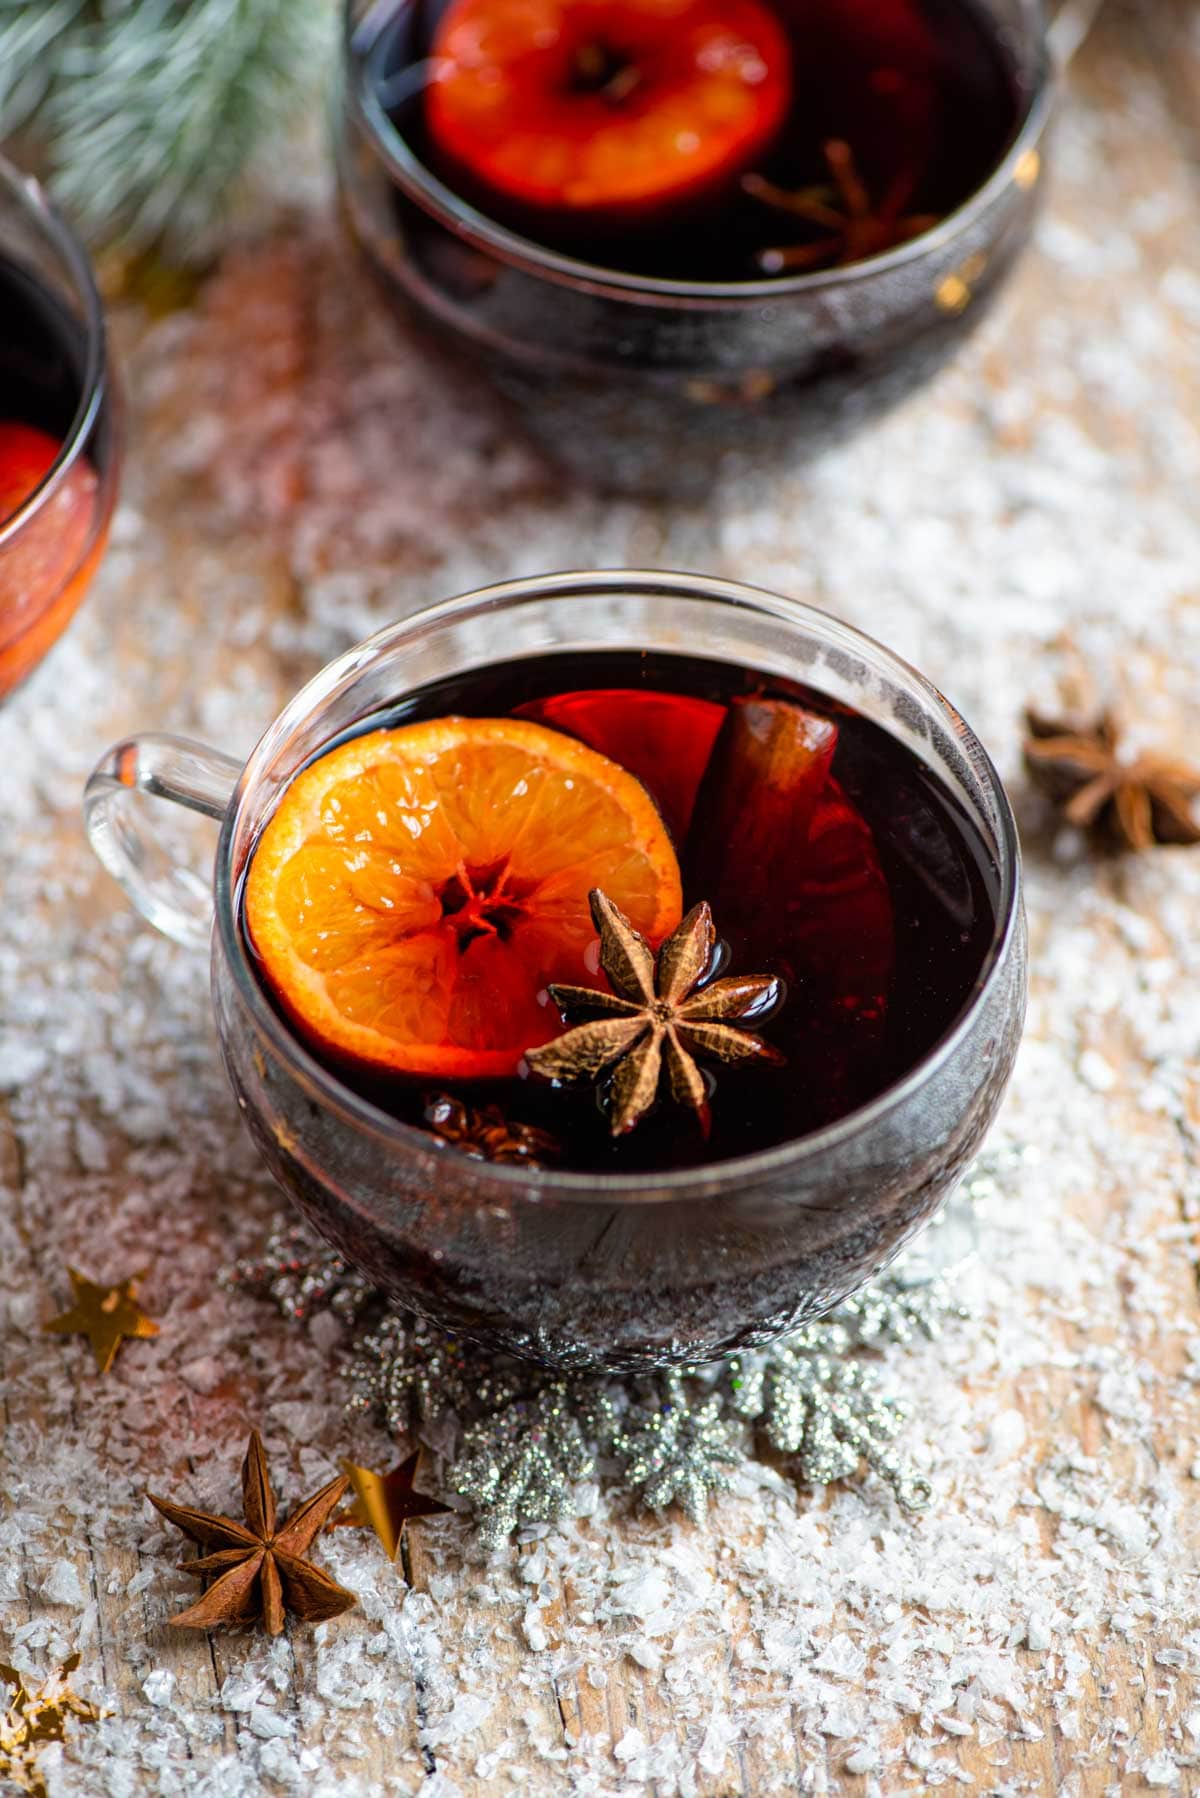 A mug of muled wine on a snowy wooden surface